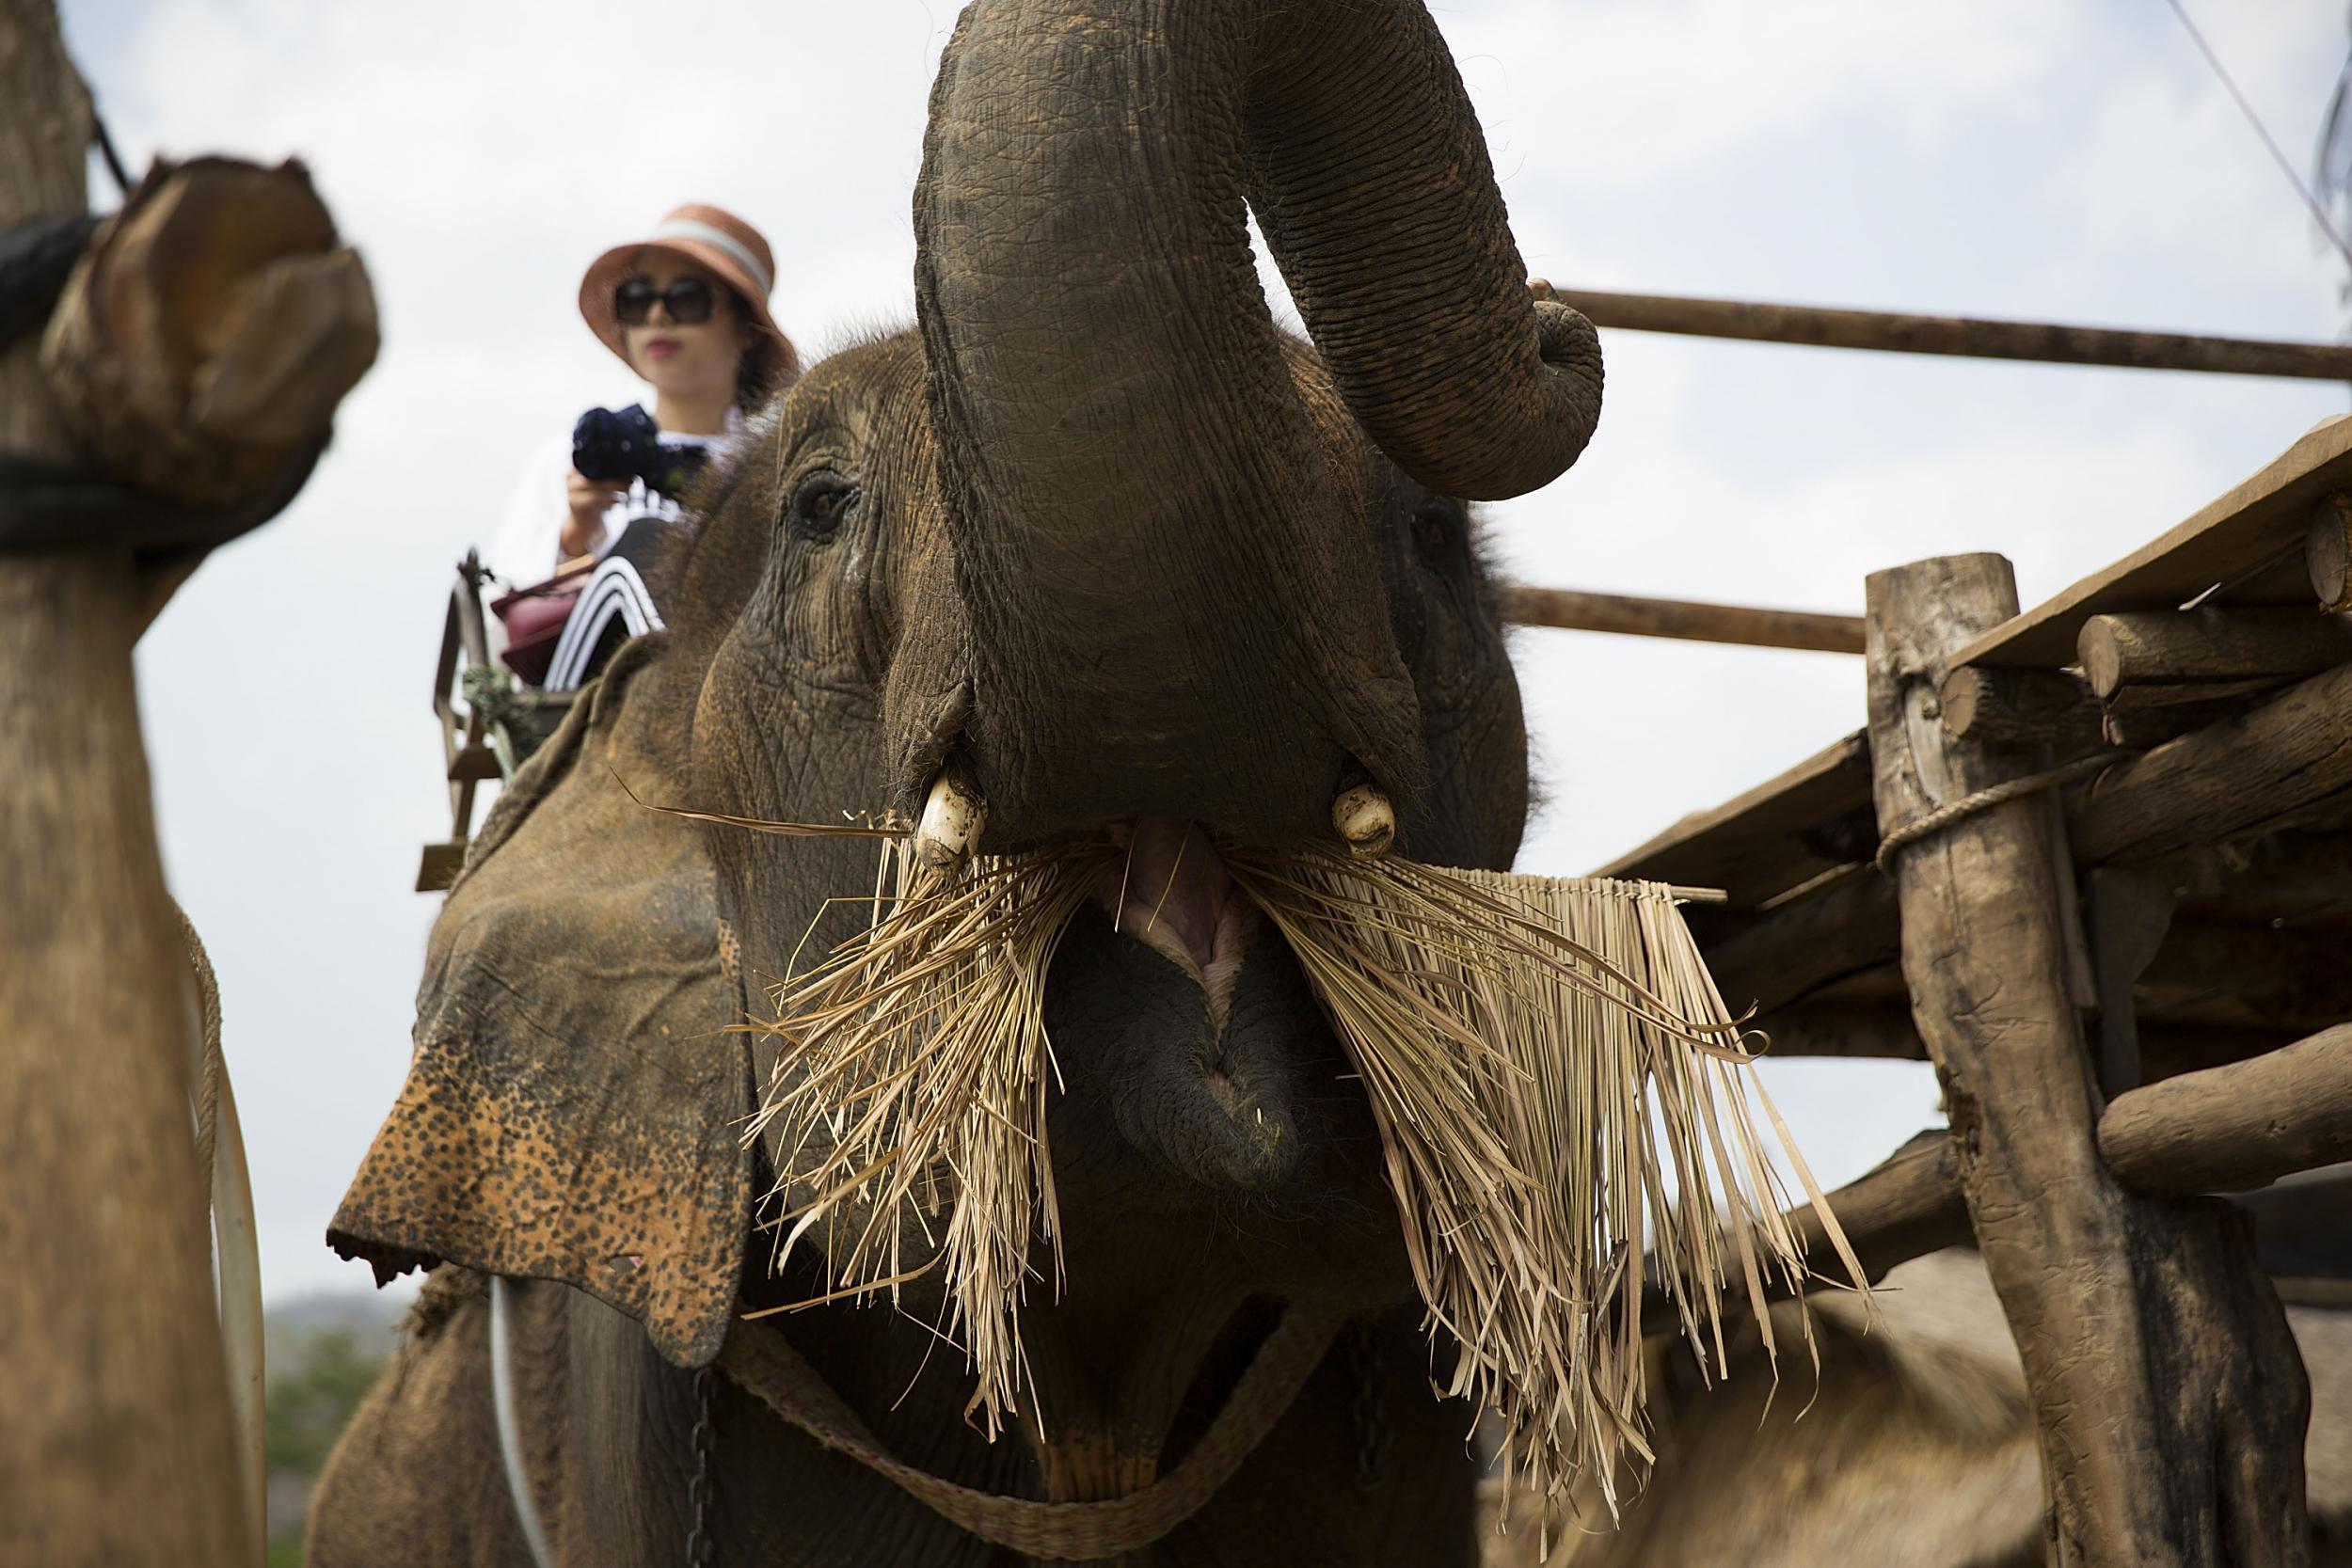 Riding elephants isn't part of Thai culture, and the animals are often maltreated